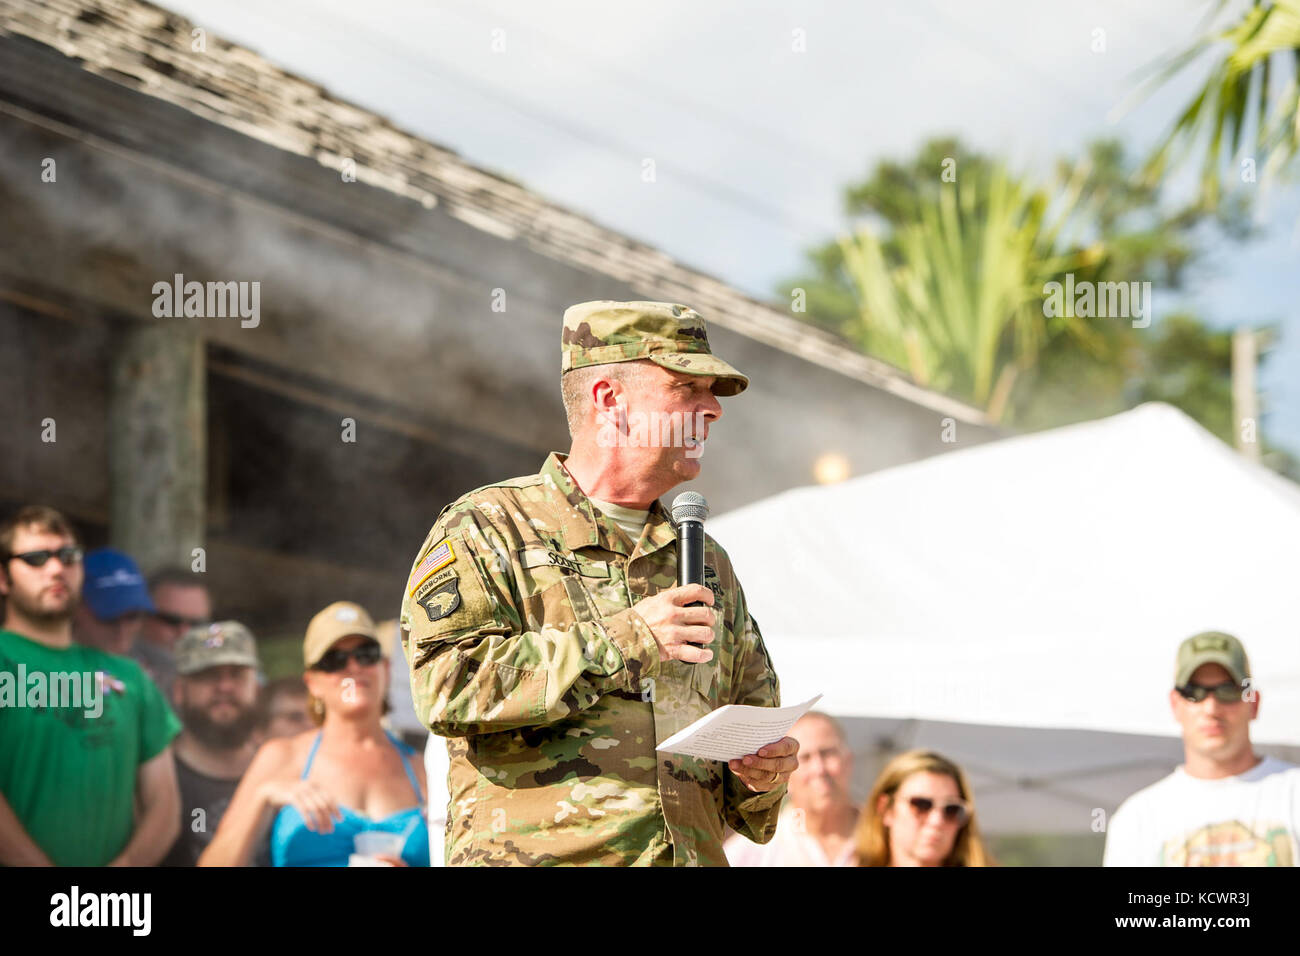 U.S. Army Chaplain Lt. Col. Clyde Scott gives a prayer at the Frayed Knot on Lake Murray, S.C., during a memorial for Army Sgts First Class Charles Judge, Jr., and Jonathon Prins, July 29, 2016.  The two soldiers were killed while attempting to protect a woman who was allegedly being attacked by a gunman. The boat procession was a way to celebrate their lives.  (U.S. Air National Guard photo by Tech. Sgt. Jorge Intriago) Stock Photo